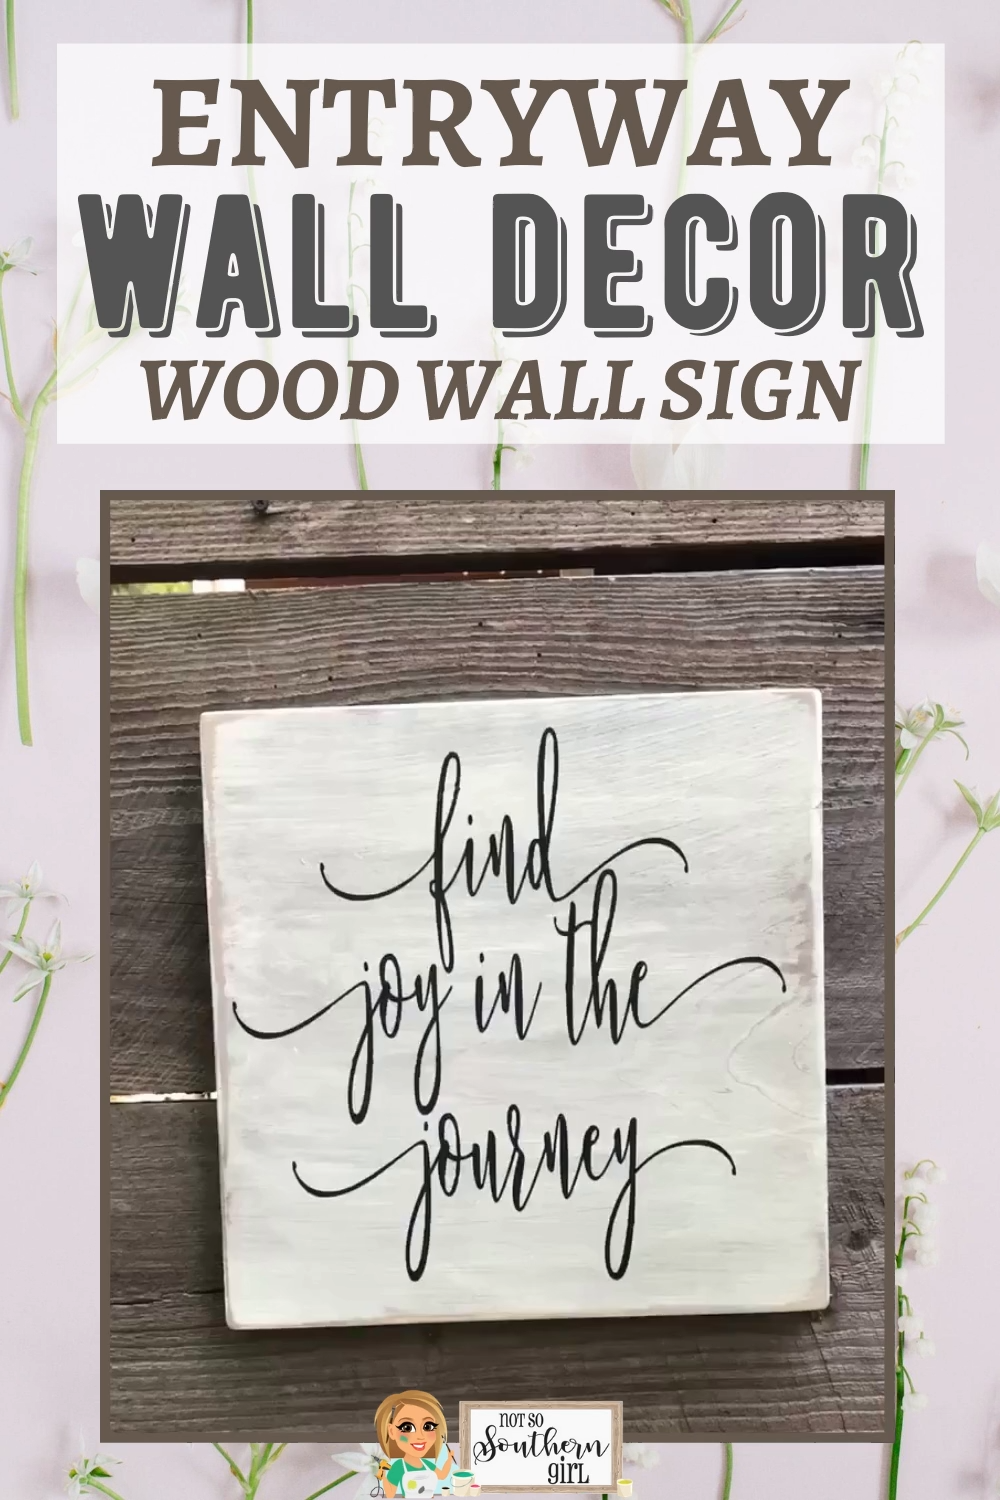 Entryway Wall Decor Wood Wall Sign -   18 home decor signs bedroom ideas